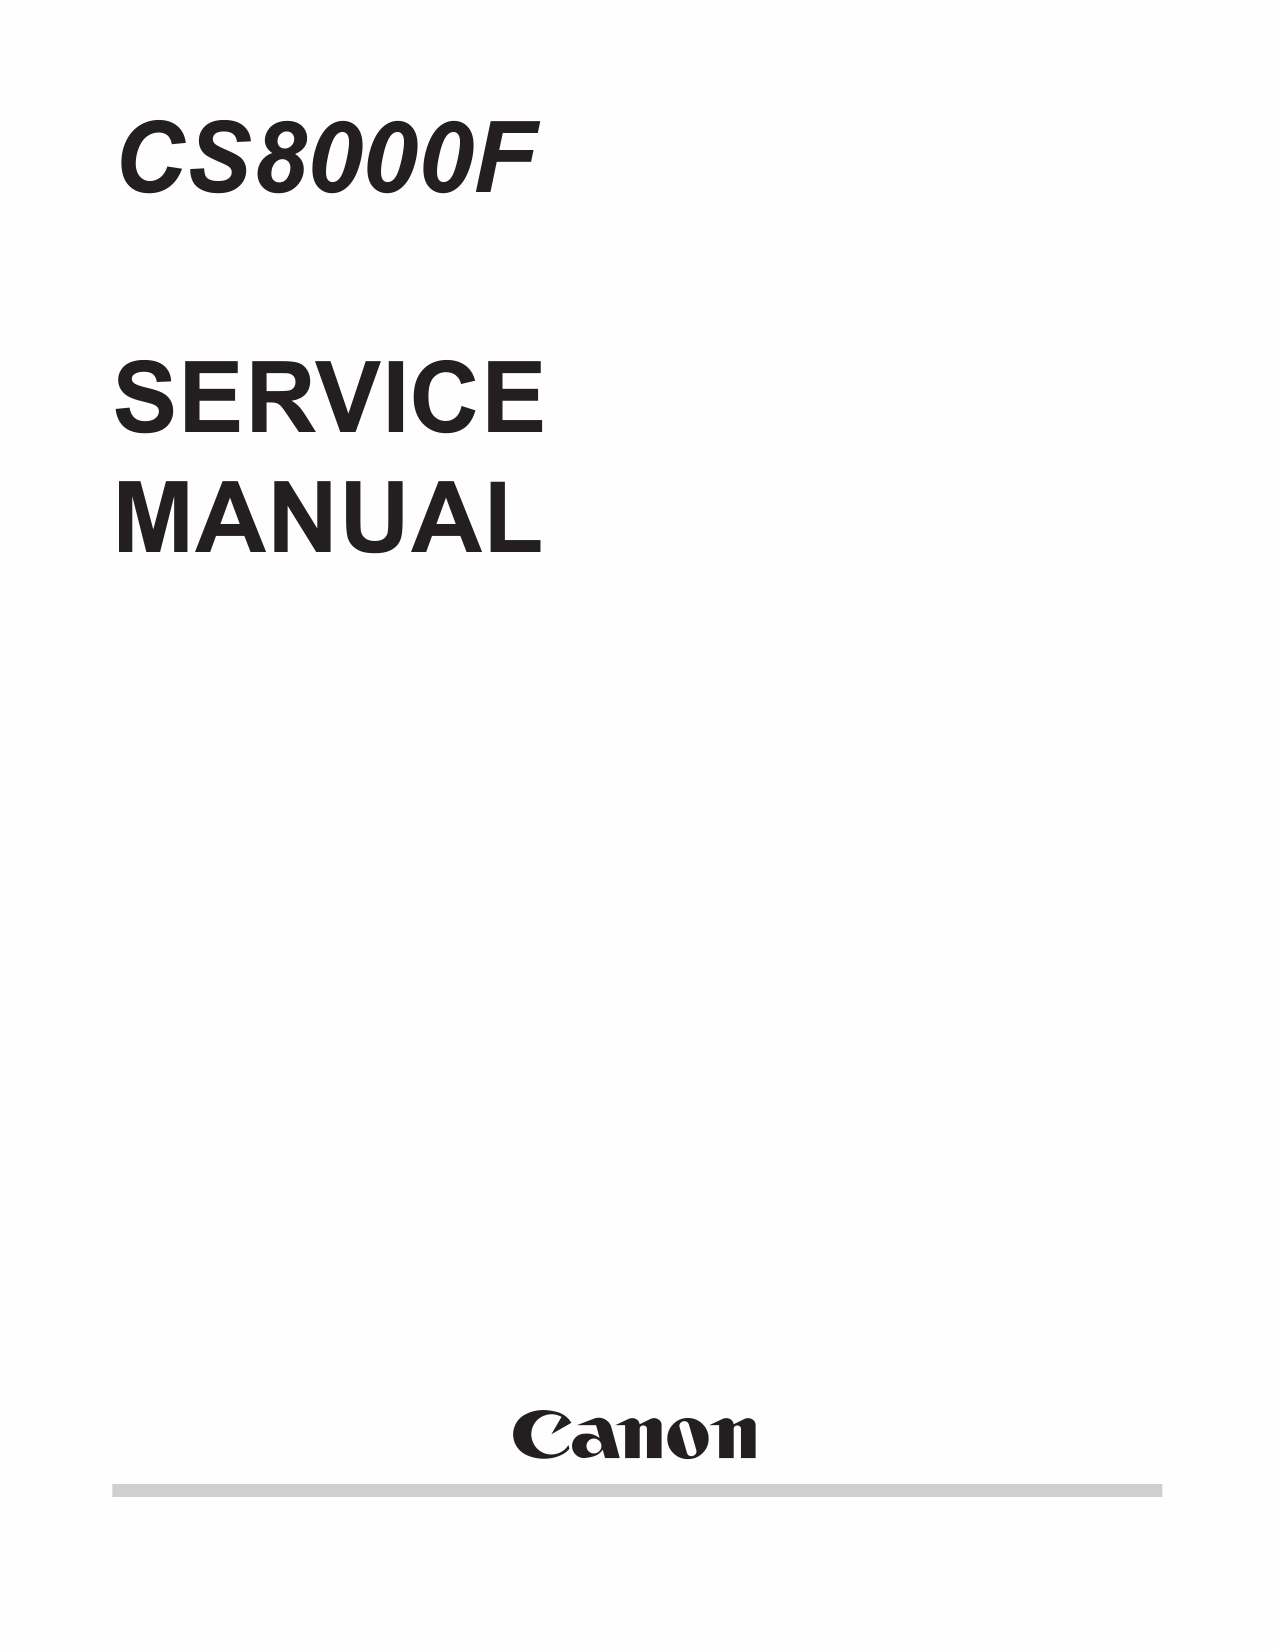 Canon Options CS-8000F Document-Scanner Parts and Service Manual-1